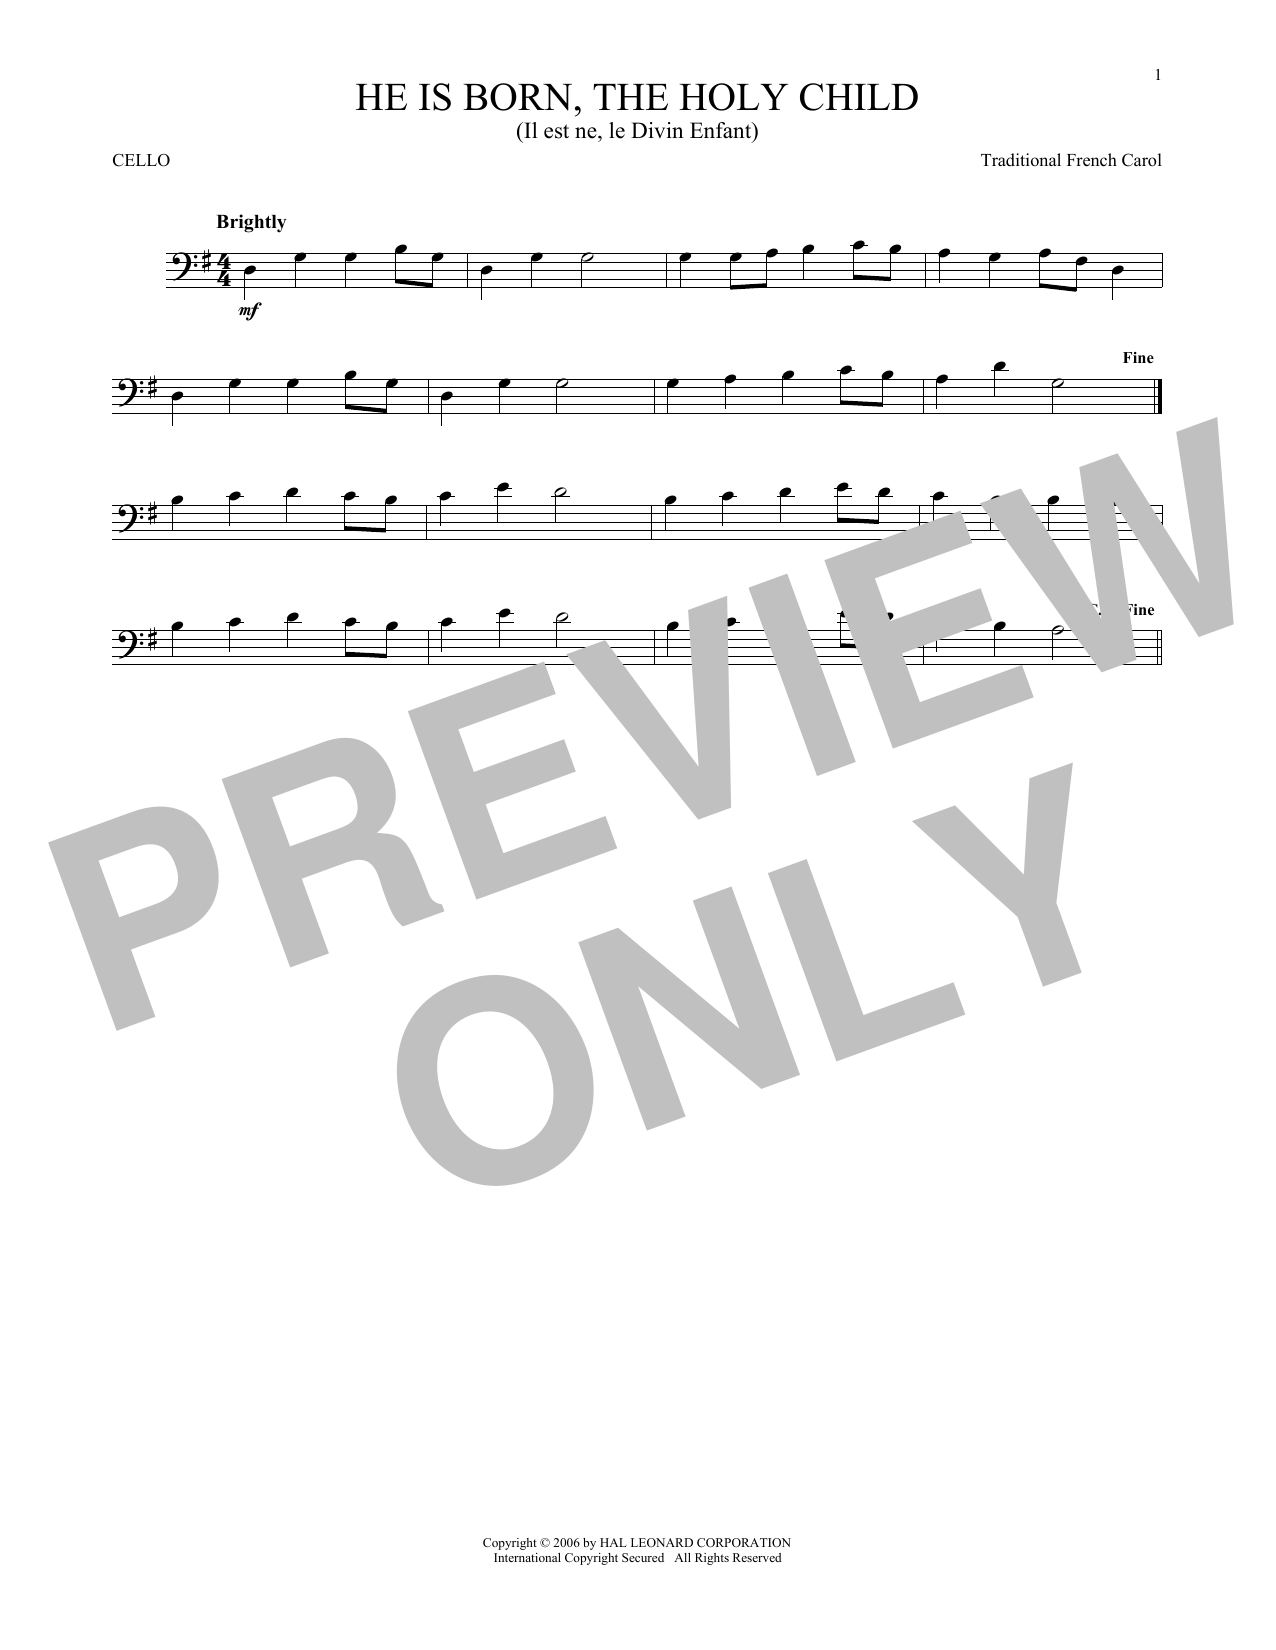 Download Traditional French Carol He Is Born, The Holy Child (Il Est Ne, Sheet Music